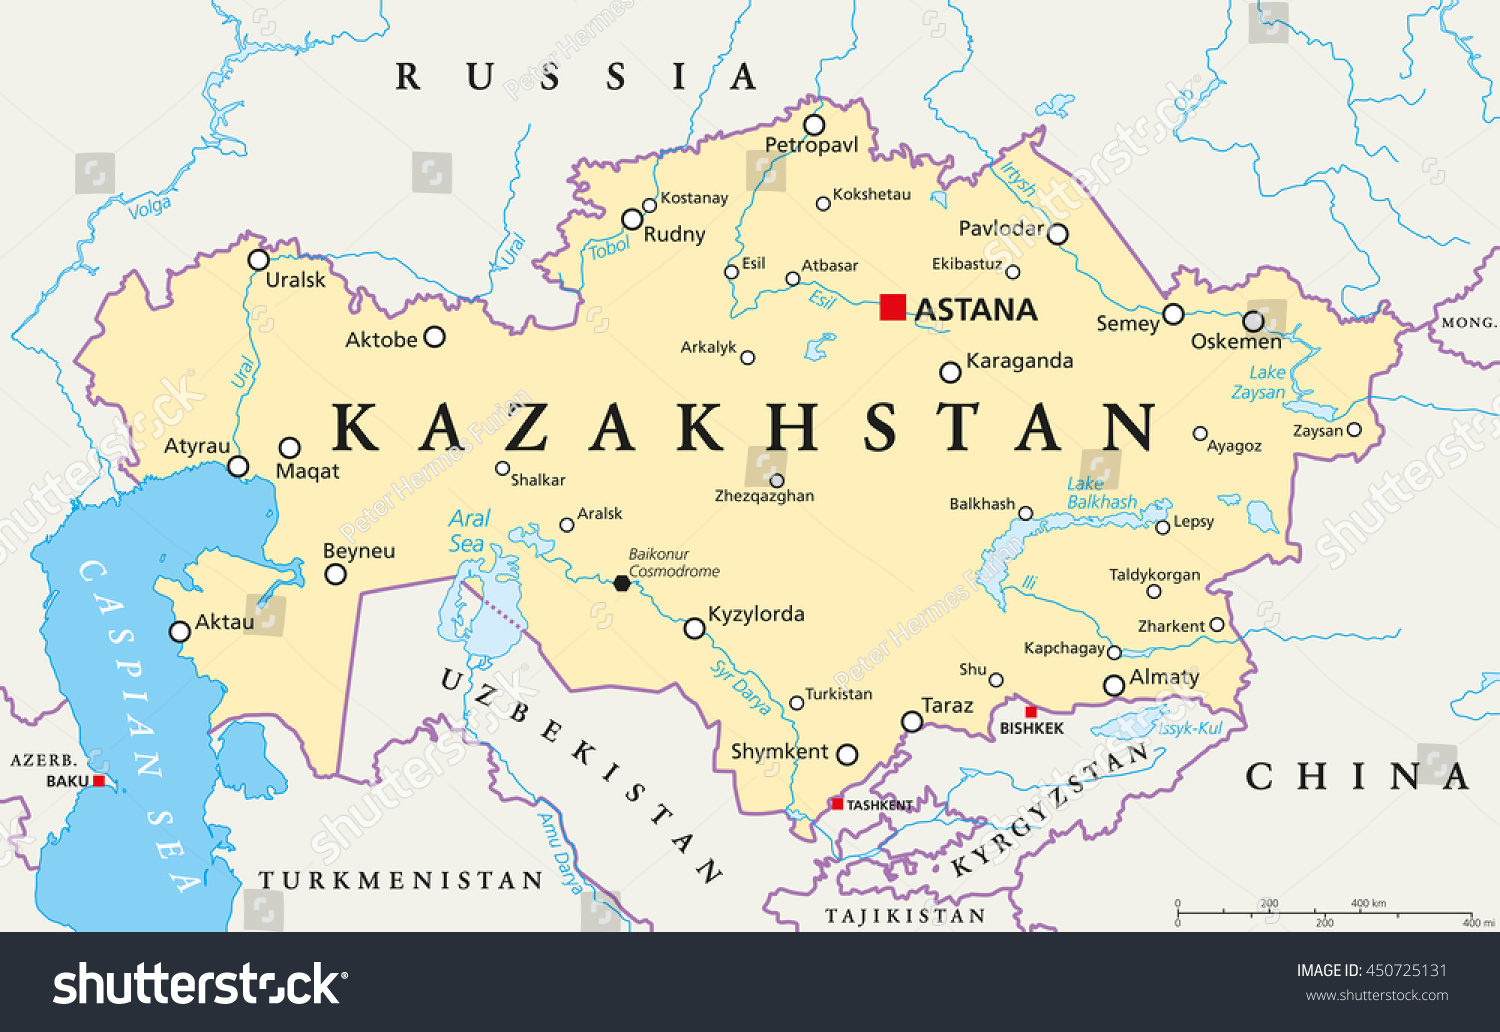 SVG of Kazakhstan political map with capital Astana, national borders, important cities, rivers and lakes. Republic in Central Asia and the worlds largest landlocked country. English labeling. Illustration. svg